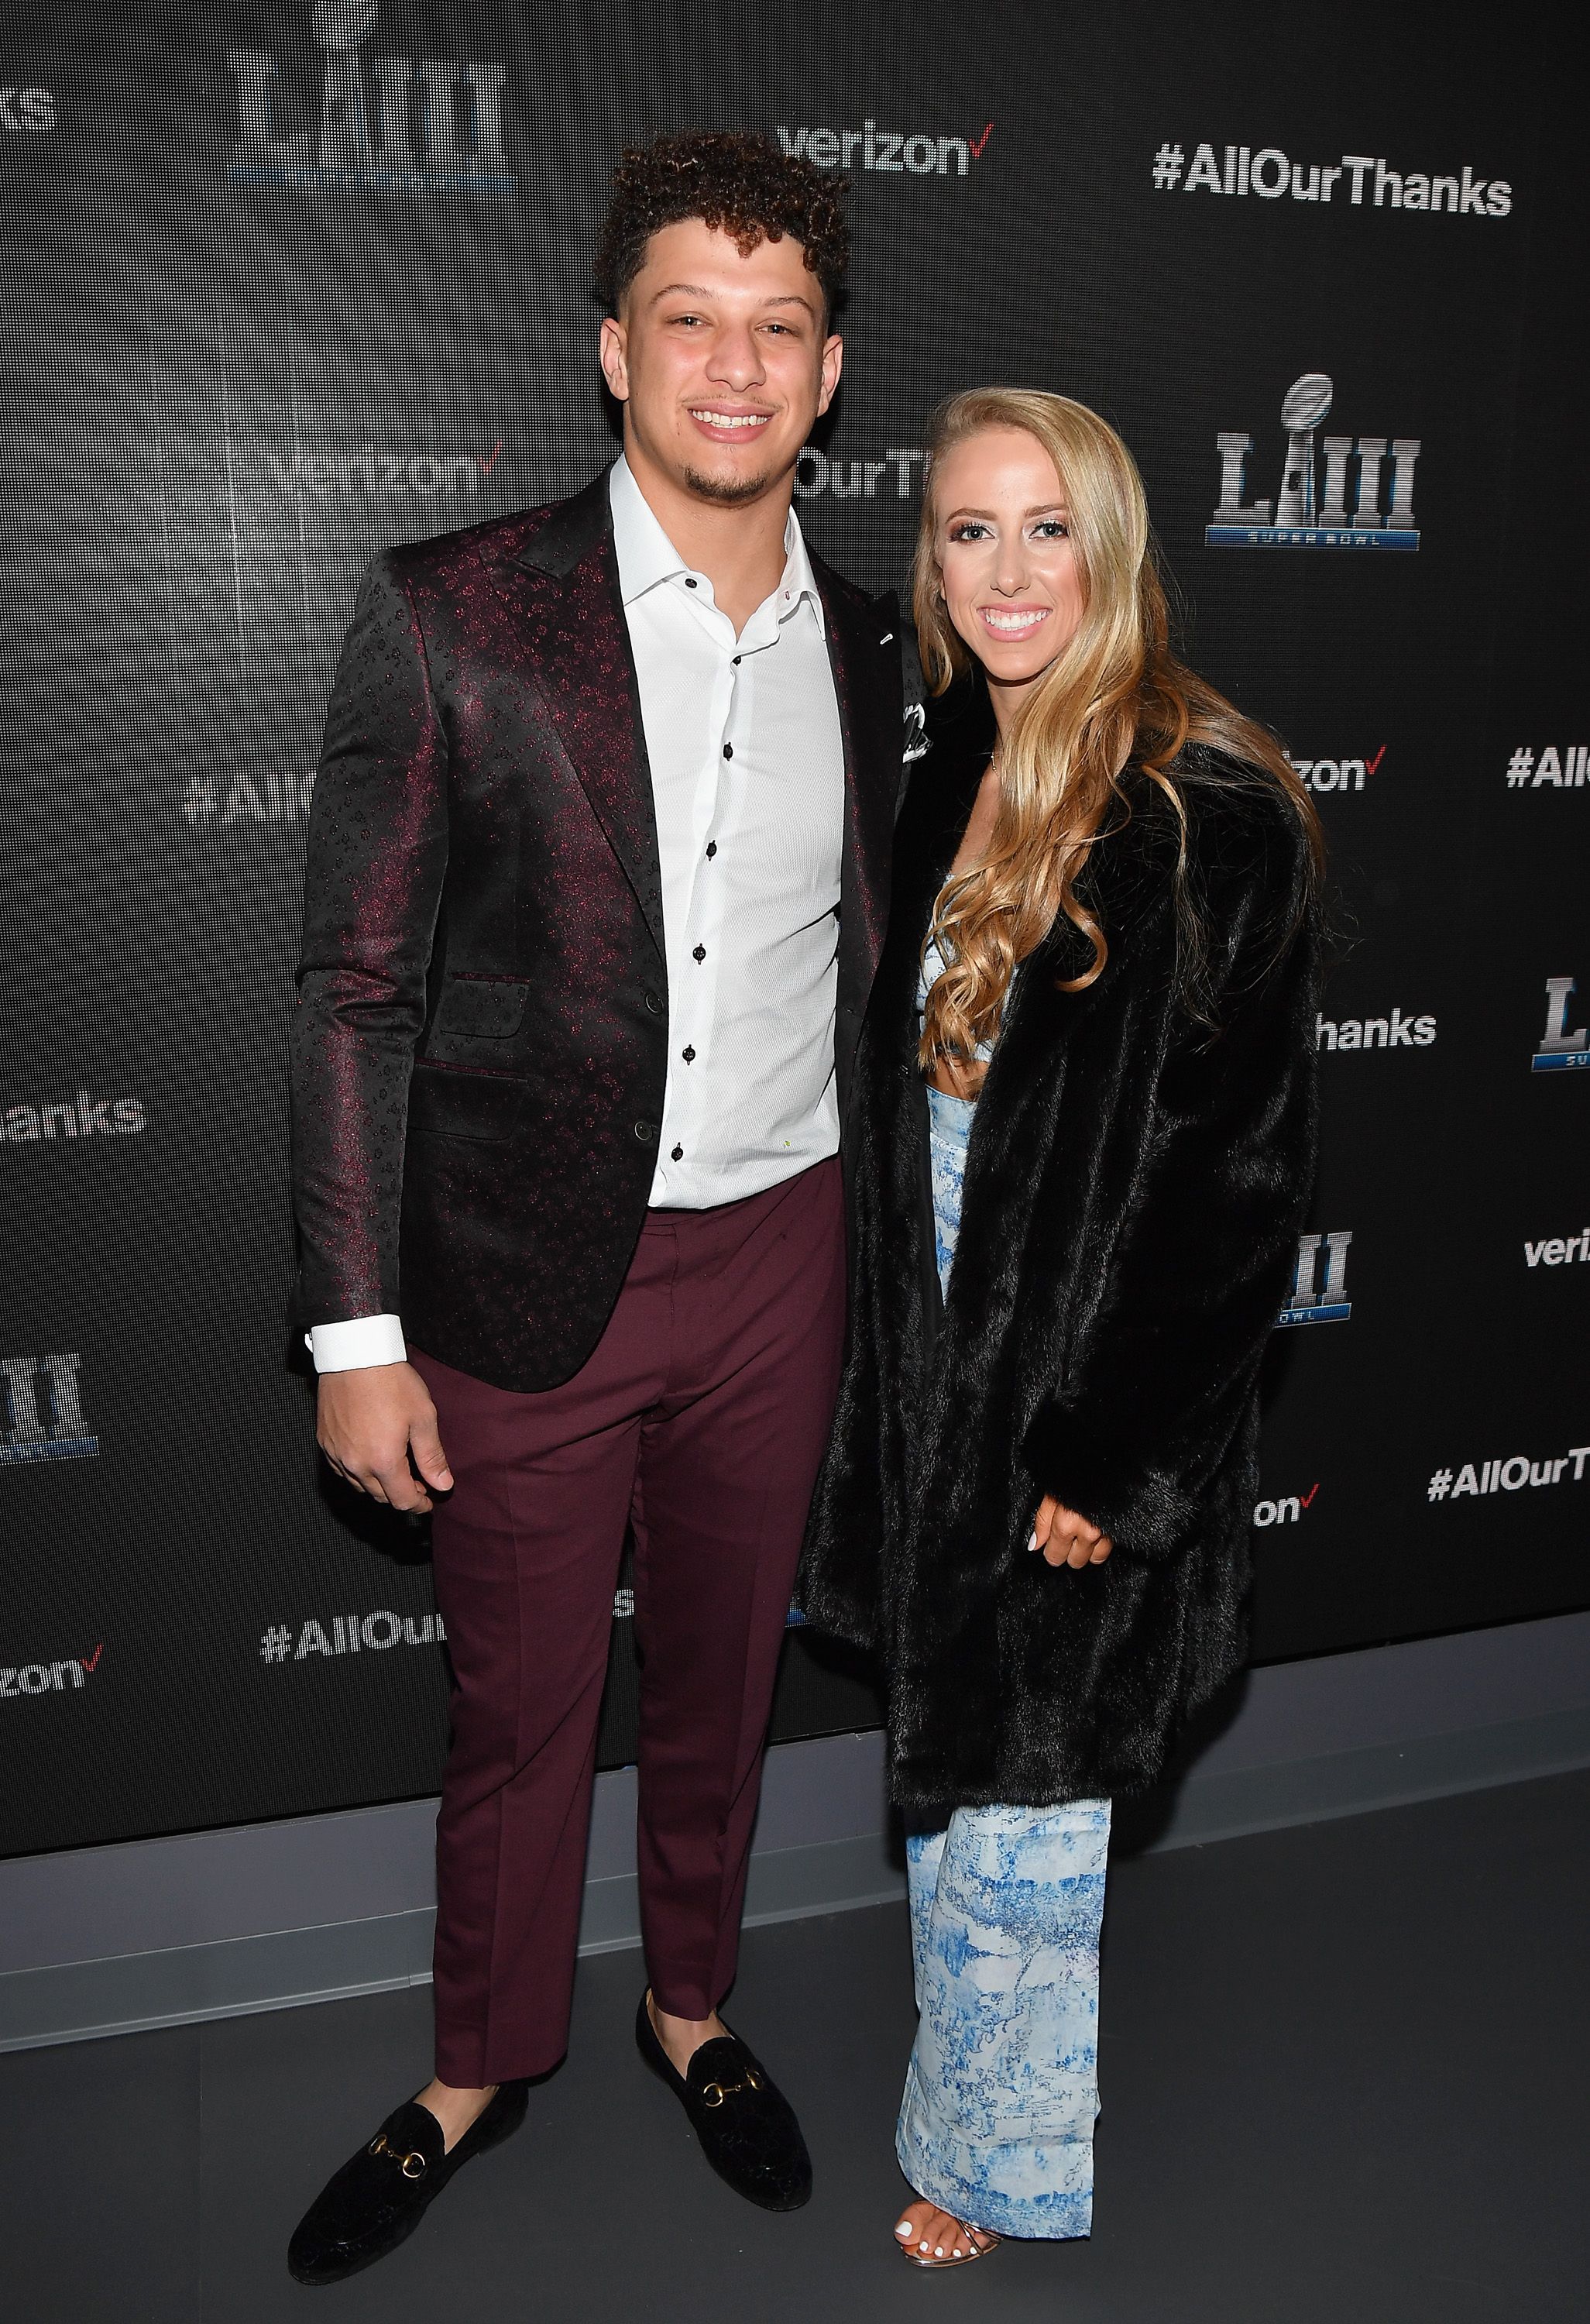 Patrick Mahomes II and Brittany Matthews during the world premiere event for "The Team That Wouldn't Be Here" documentary hosted by Verizon on January 31, 2019 in Atlanta, Georgia. | Source: Getty Images